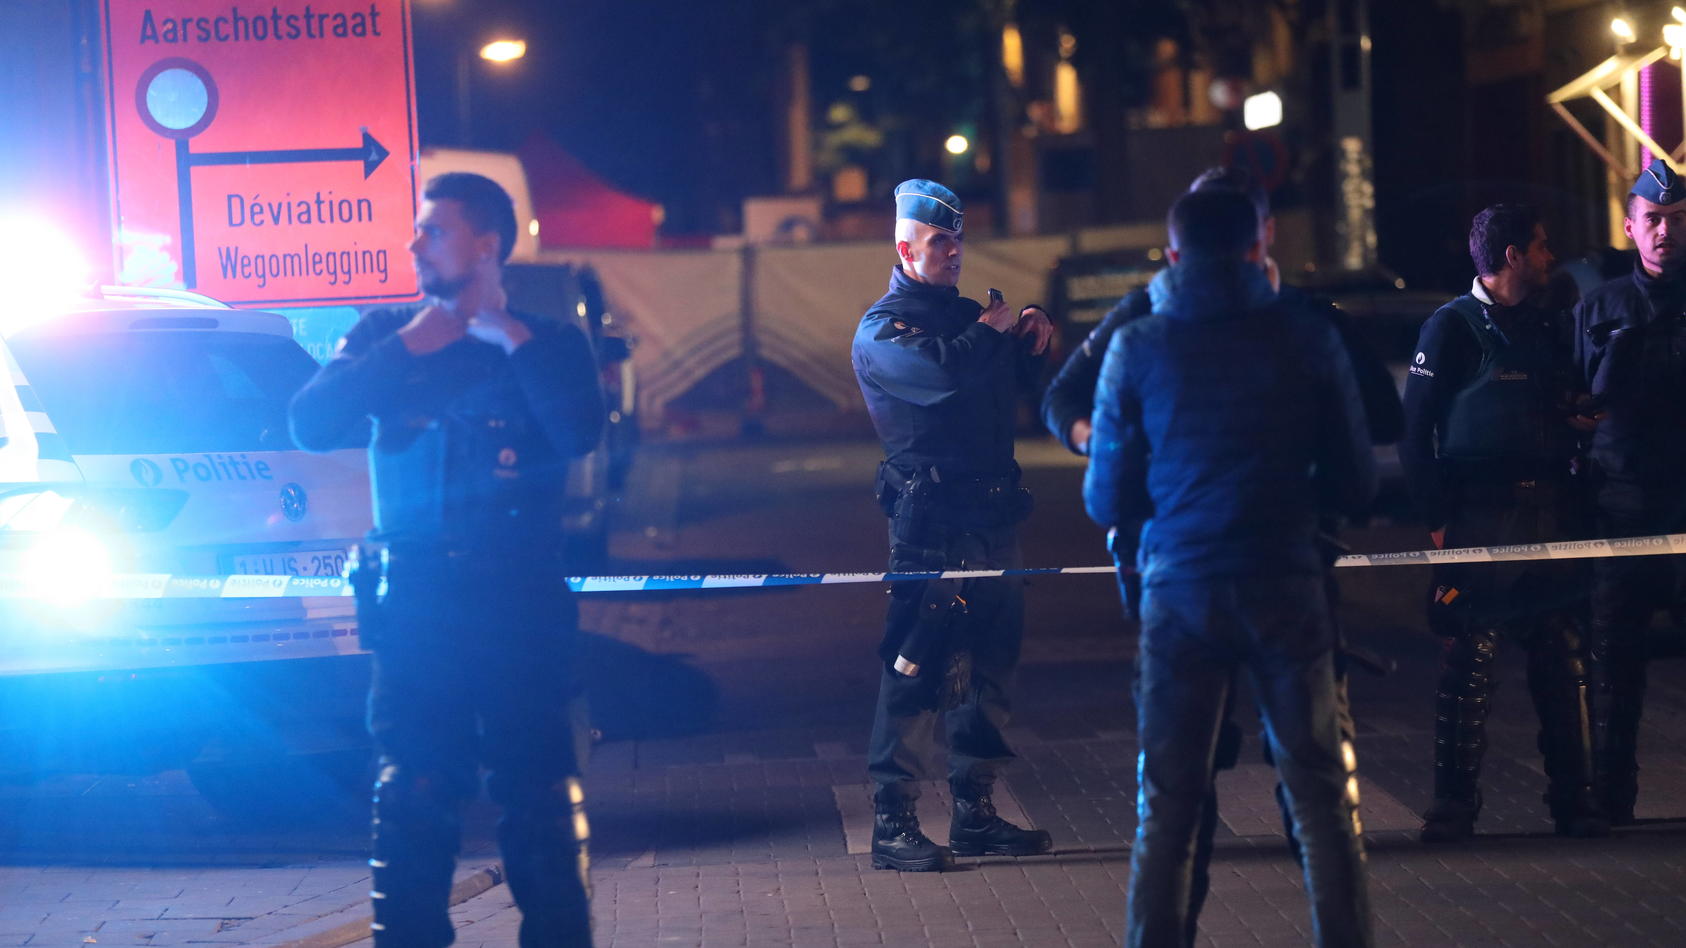 Police officers pictured at the scene of a stabbing incident at the Aarschotstraat in Schaarbeek, Brussels, Thursday 10 November 2022. One of the policemen stabbed in the incident has died of his injuries. Another policeman was brought to the hospita